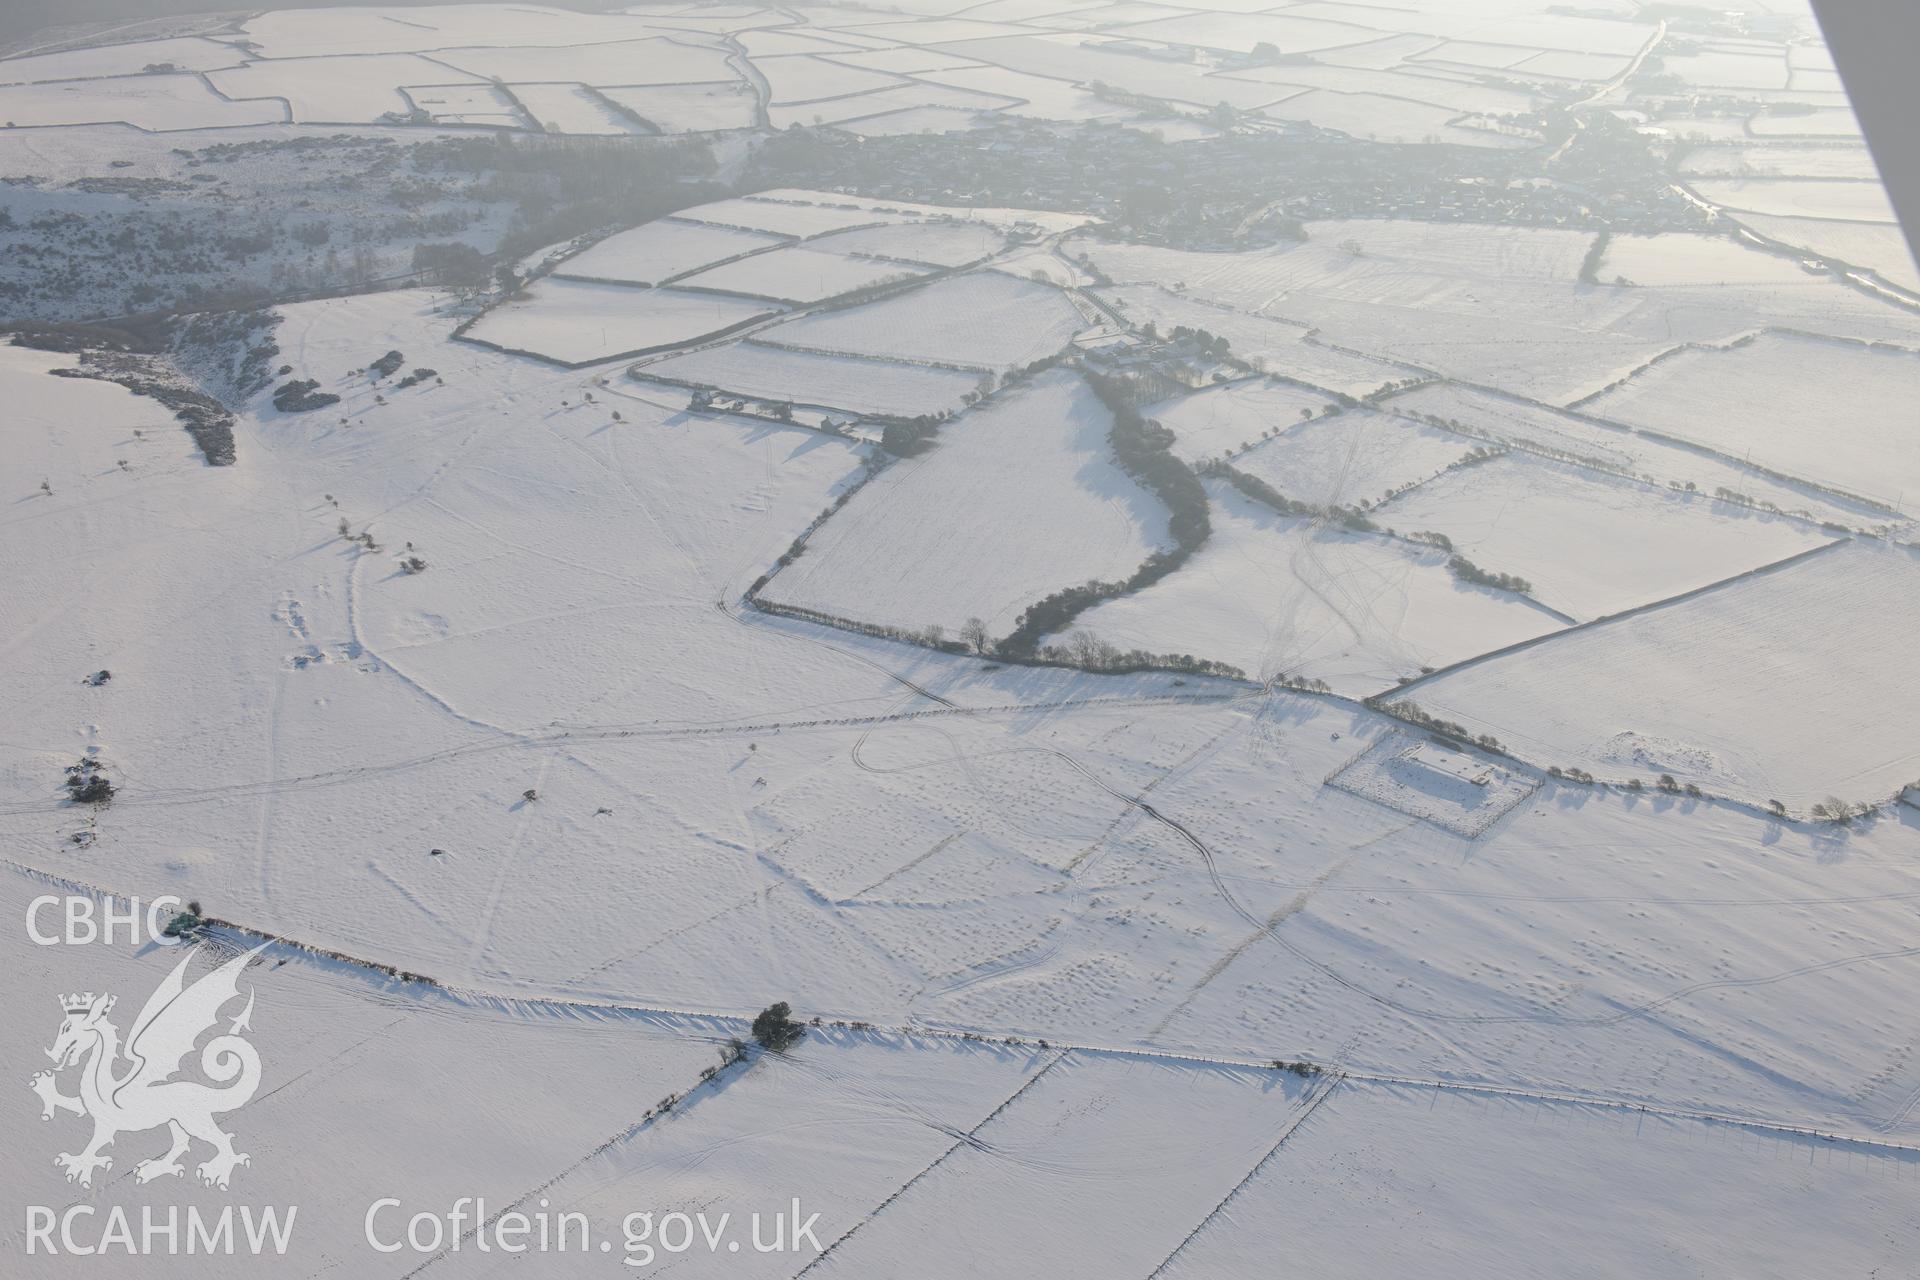 Beacons Down field system, St Brides Major, south west of Bridgend. Oblique aerial photograph taken during the Royal Commission?s programme of archaeological aerial reconnaissance by Toby Driver on 24th January 2013.